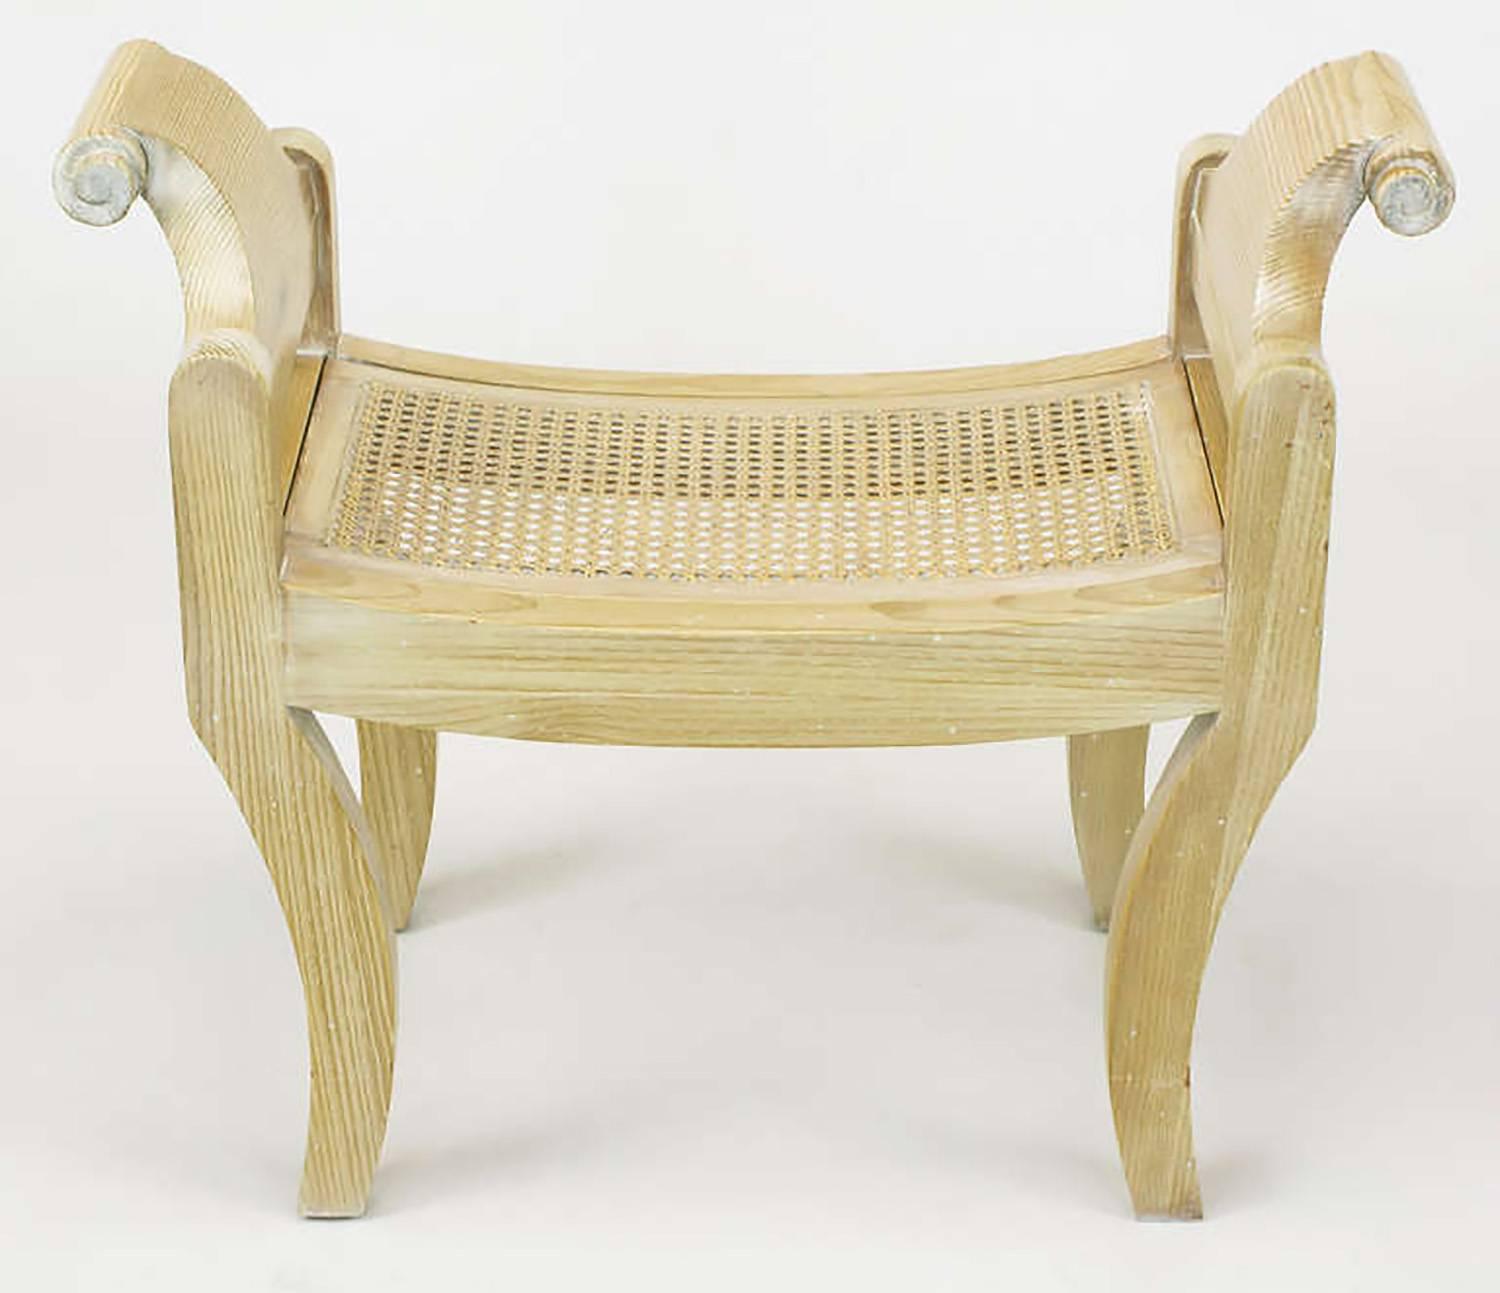 Pair of Swedish Rococo style pine benches with klismos form legs, scrolled arm handles and curved cane seats. Constructed from white pine, glazed in white and restored with patina left intact.